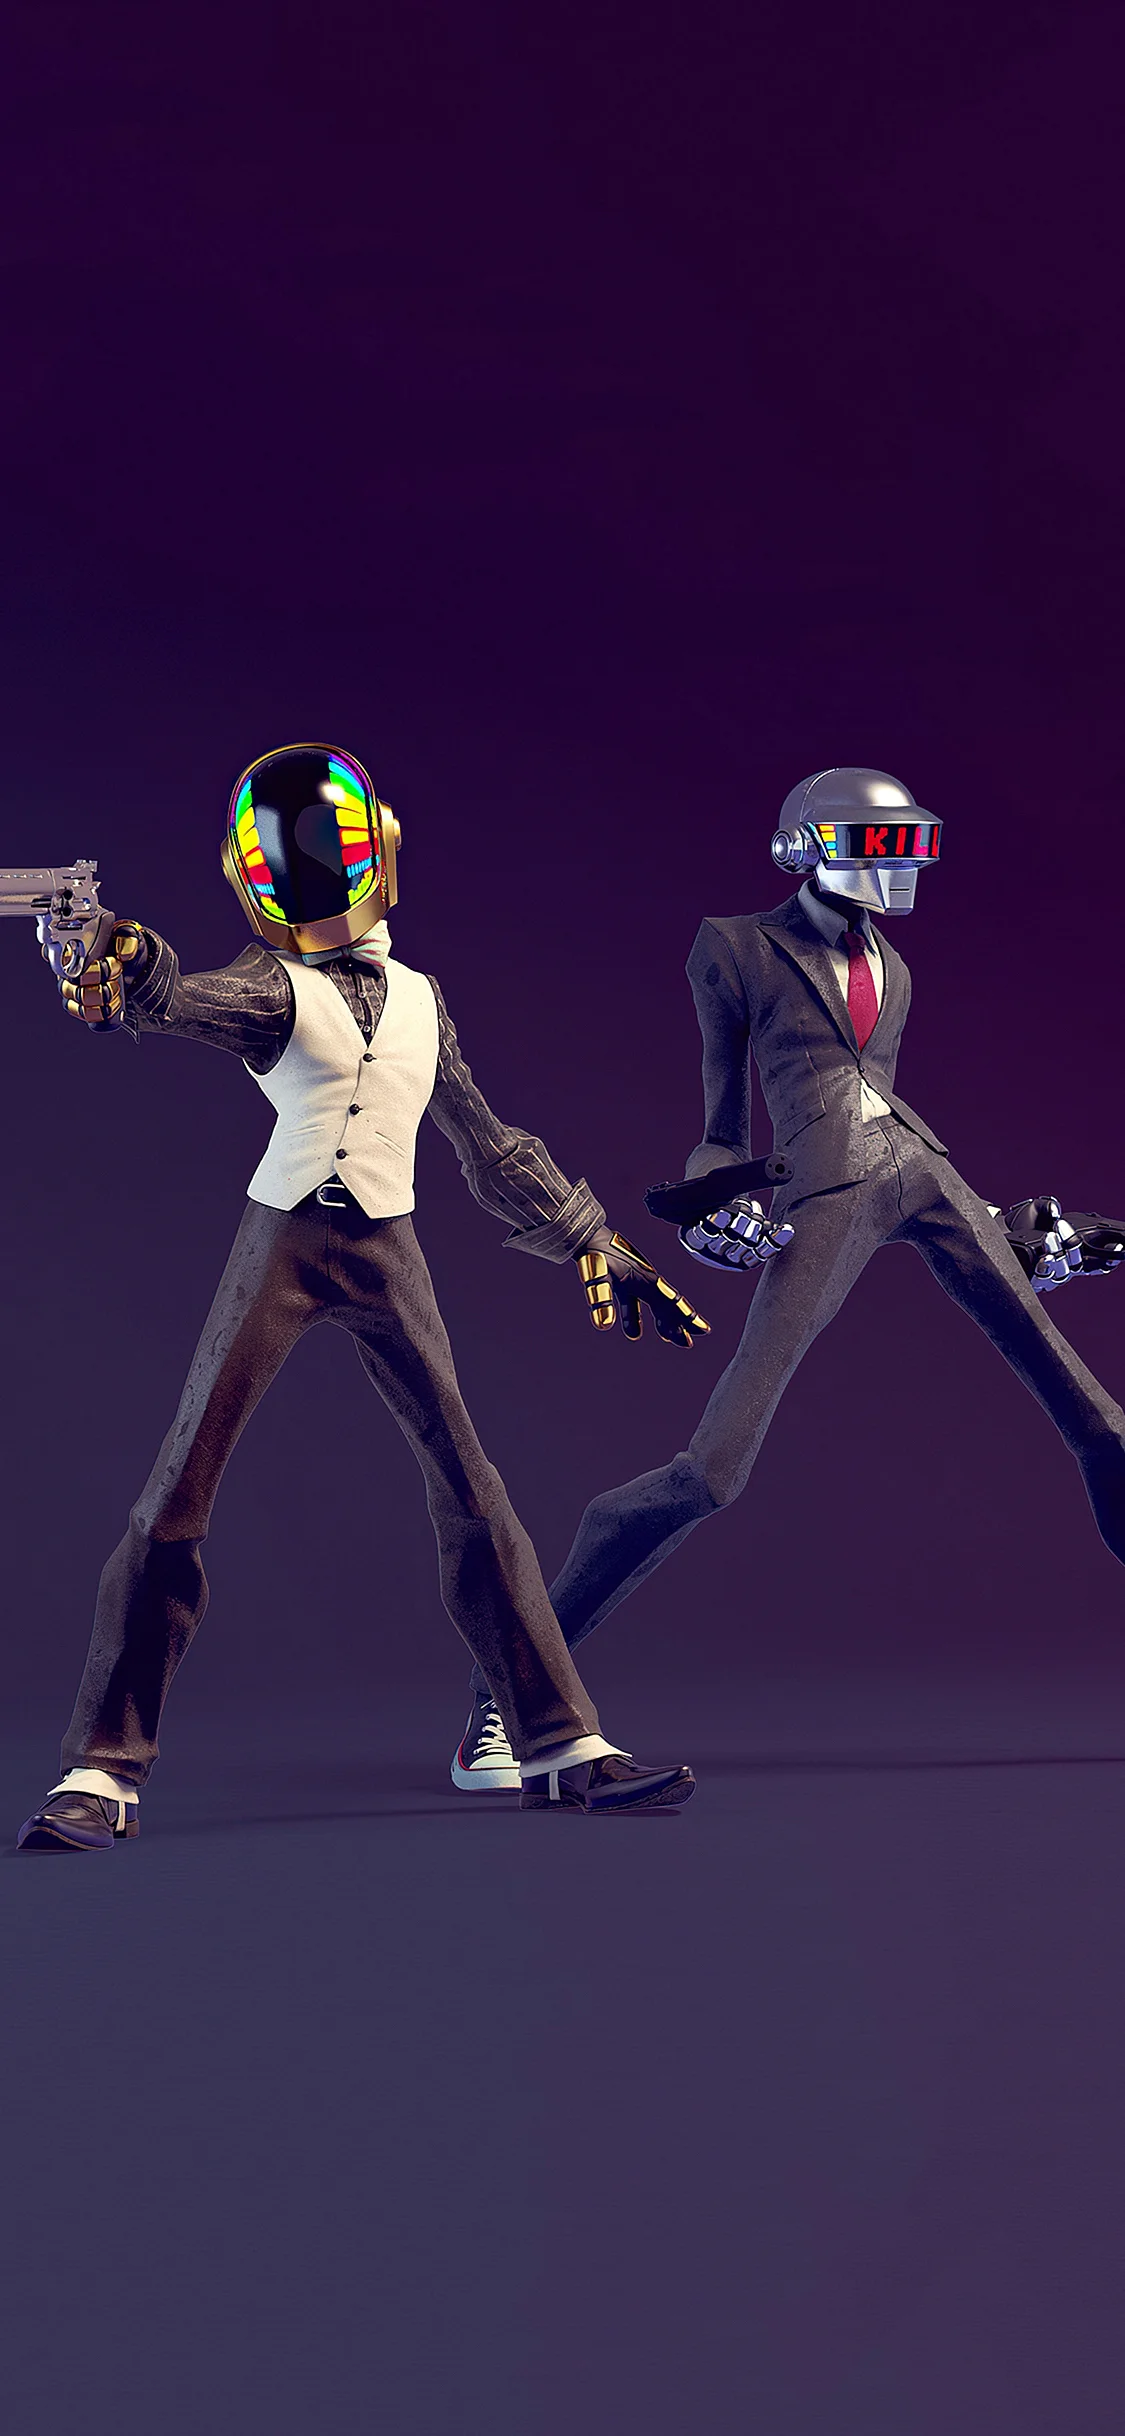 Daft Punk Skeletons Around The World Wallpaper For iPhone